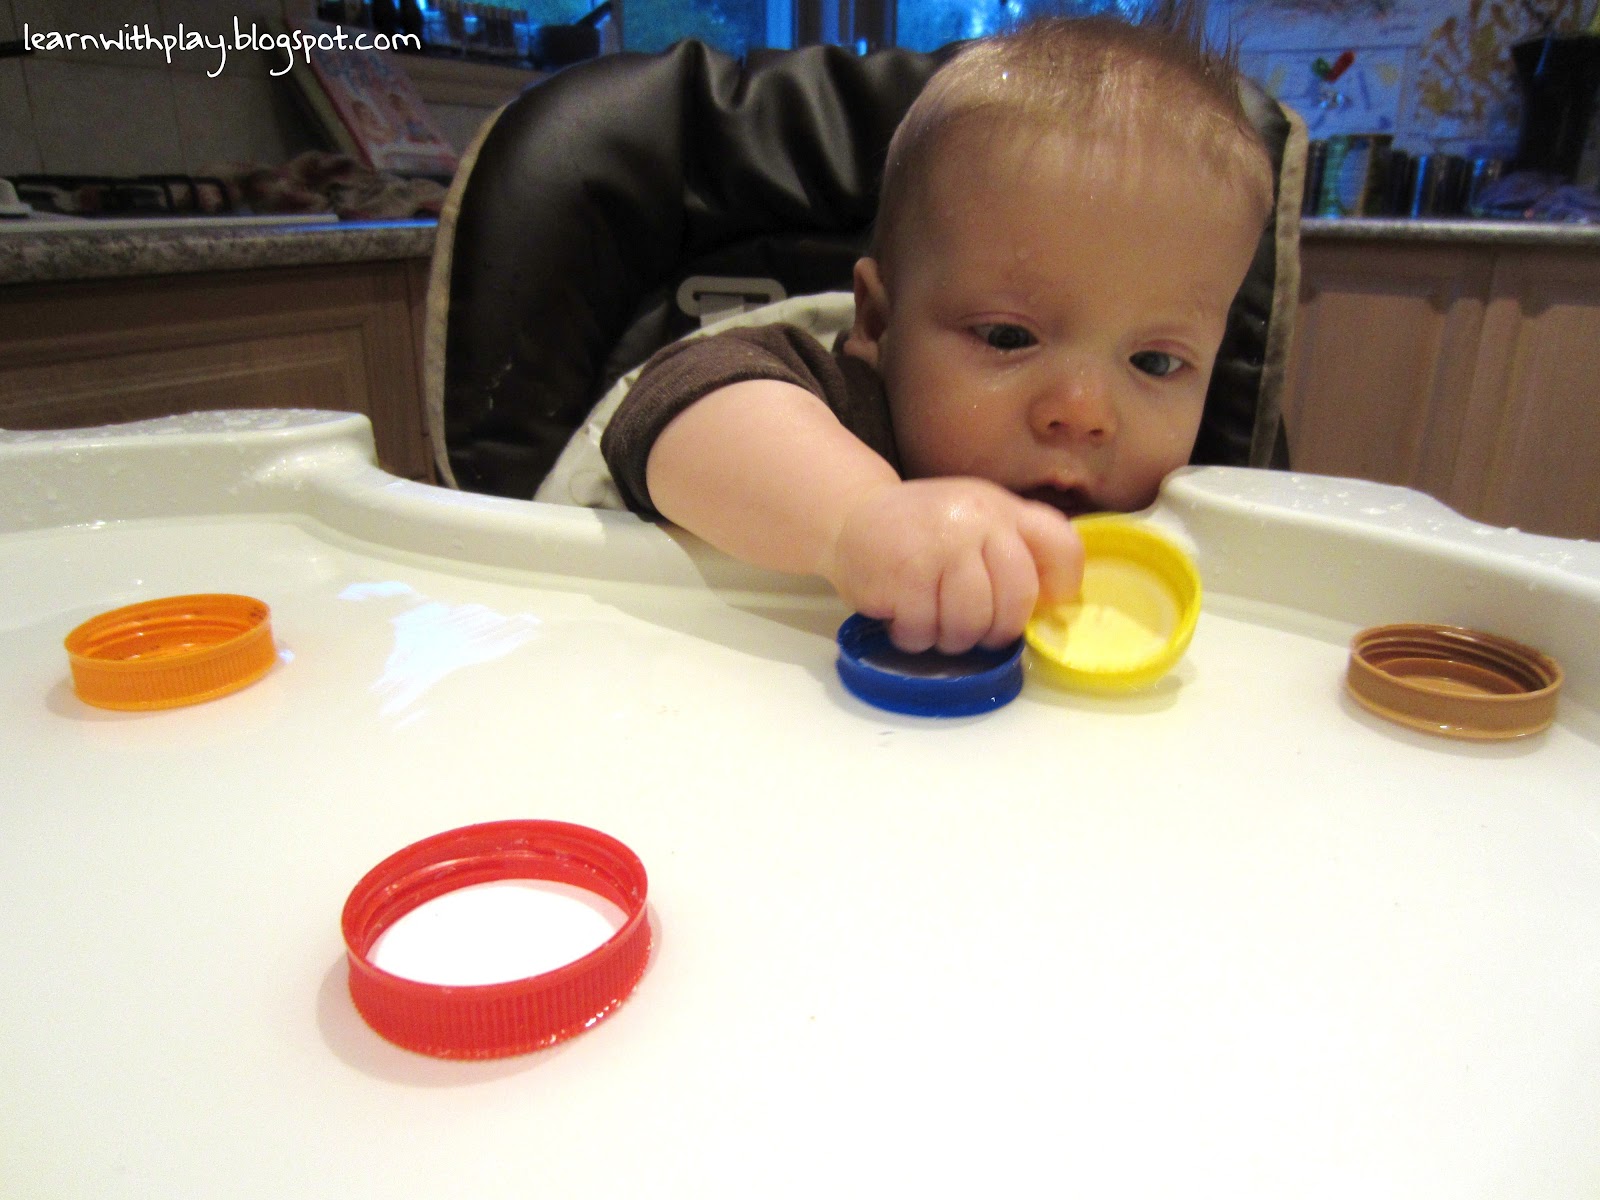 Learn with Play at Home: Baby Play: Water Tray Play